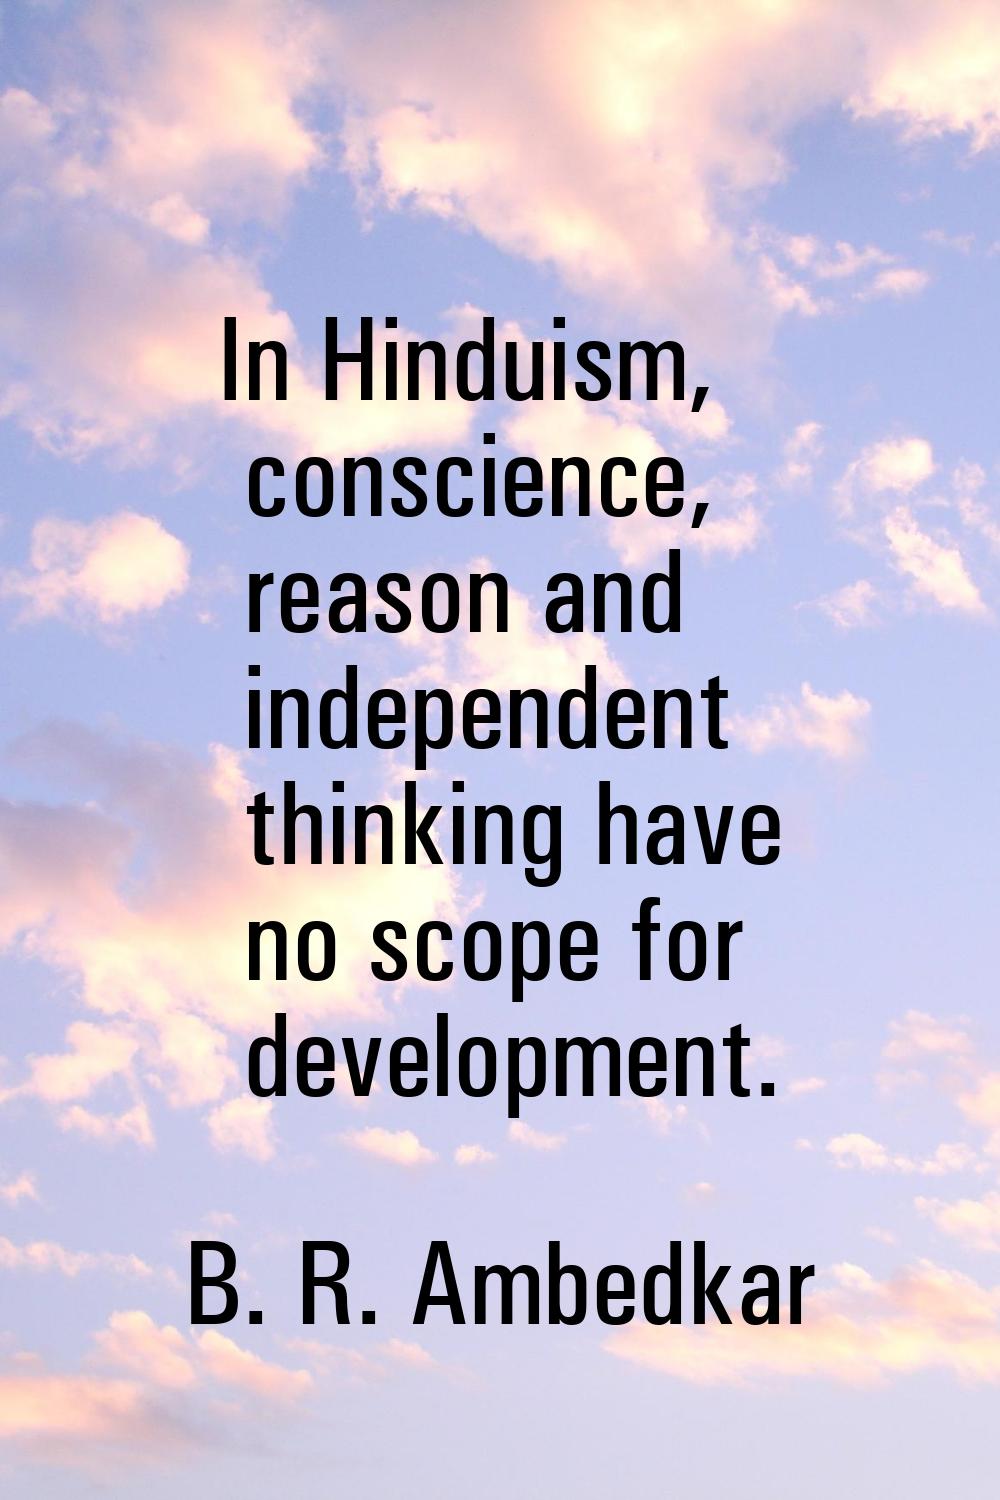 In Hinduism, conscience, reason and independent thinking have no scope for development.